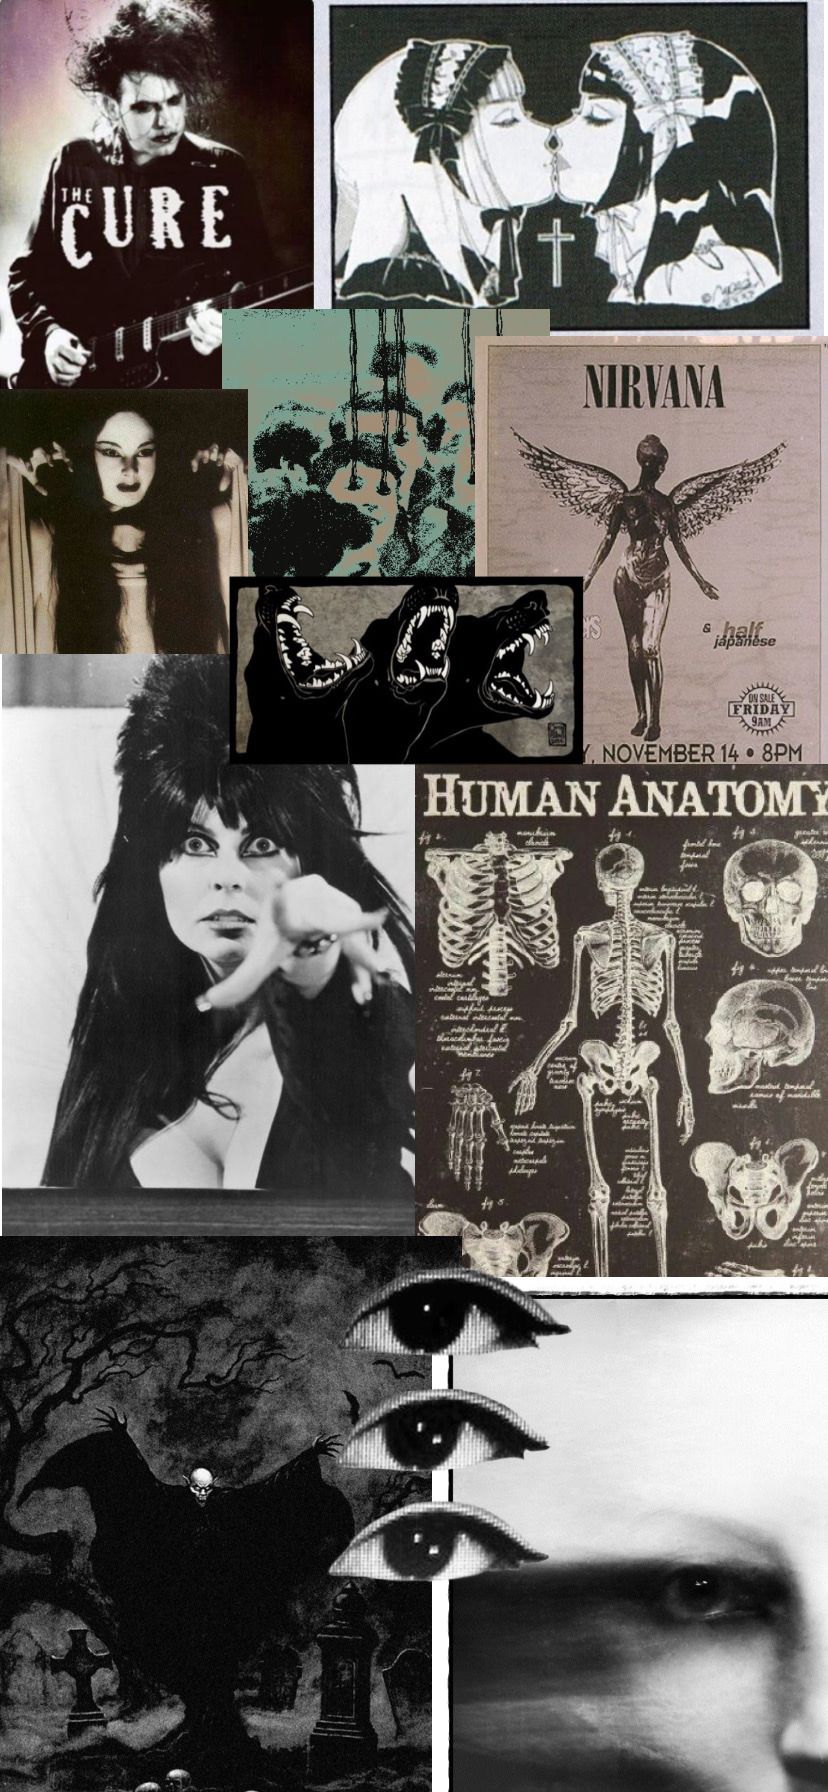 A collage of black and white images including Nirvana, The Cure, and human anatomy. - Punk, anatomy